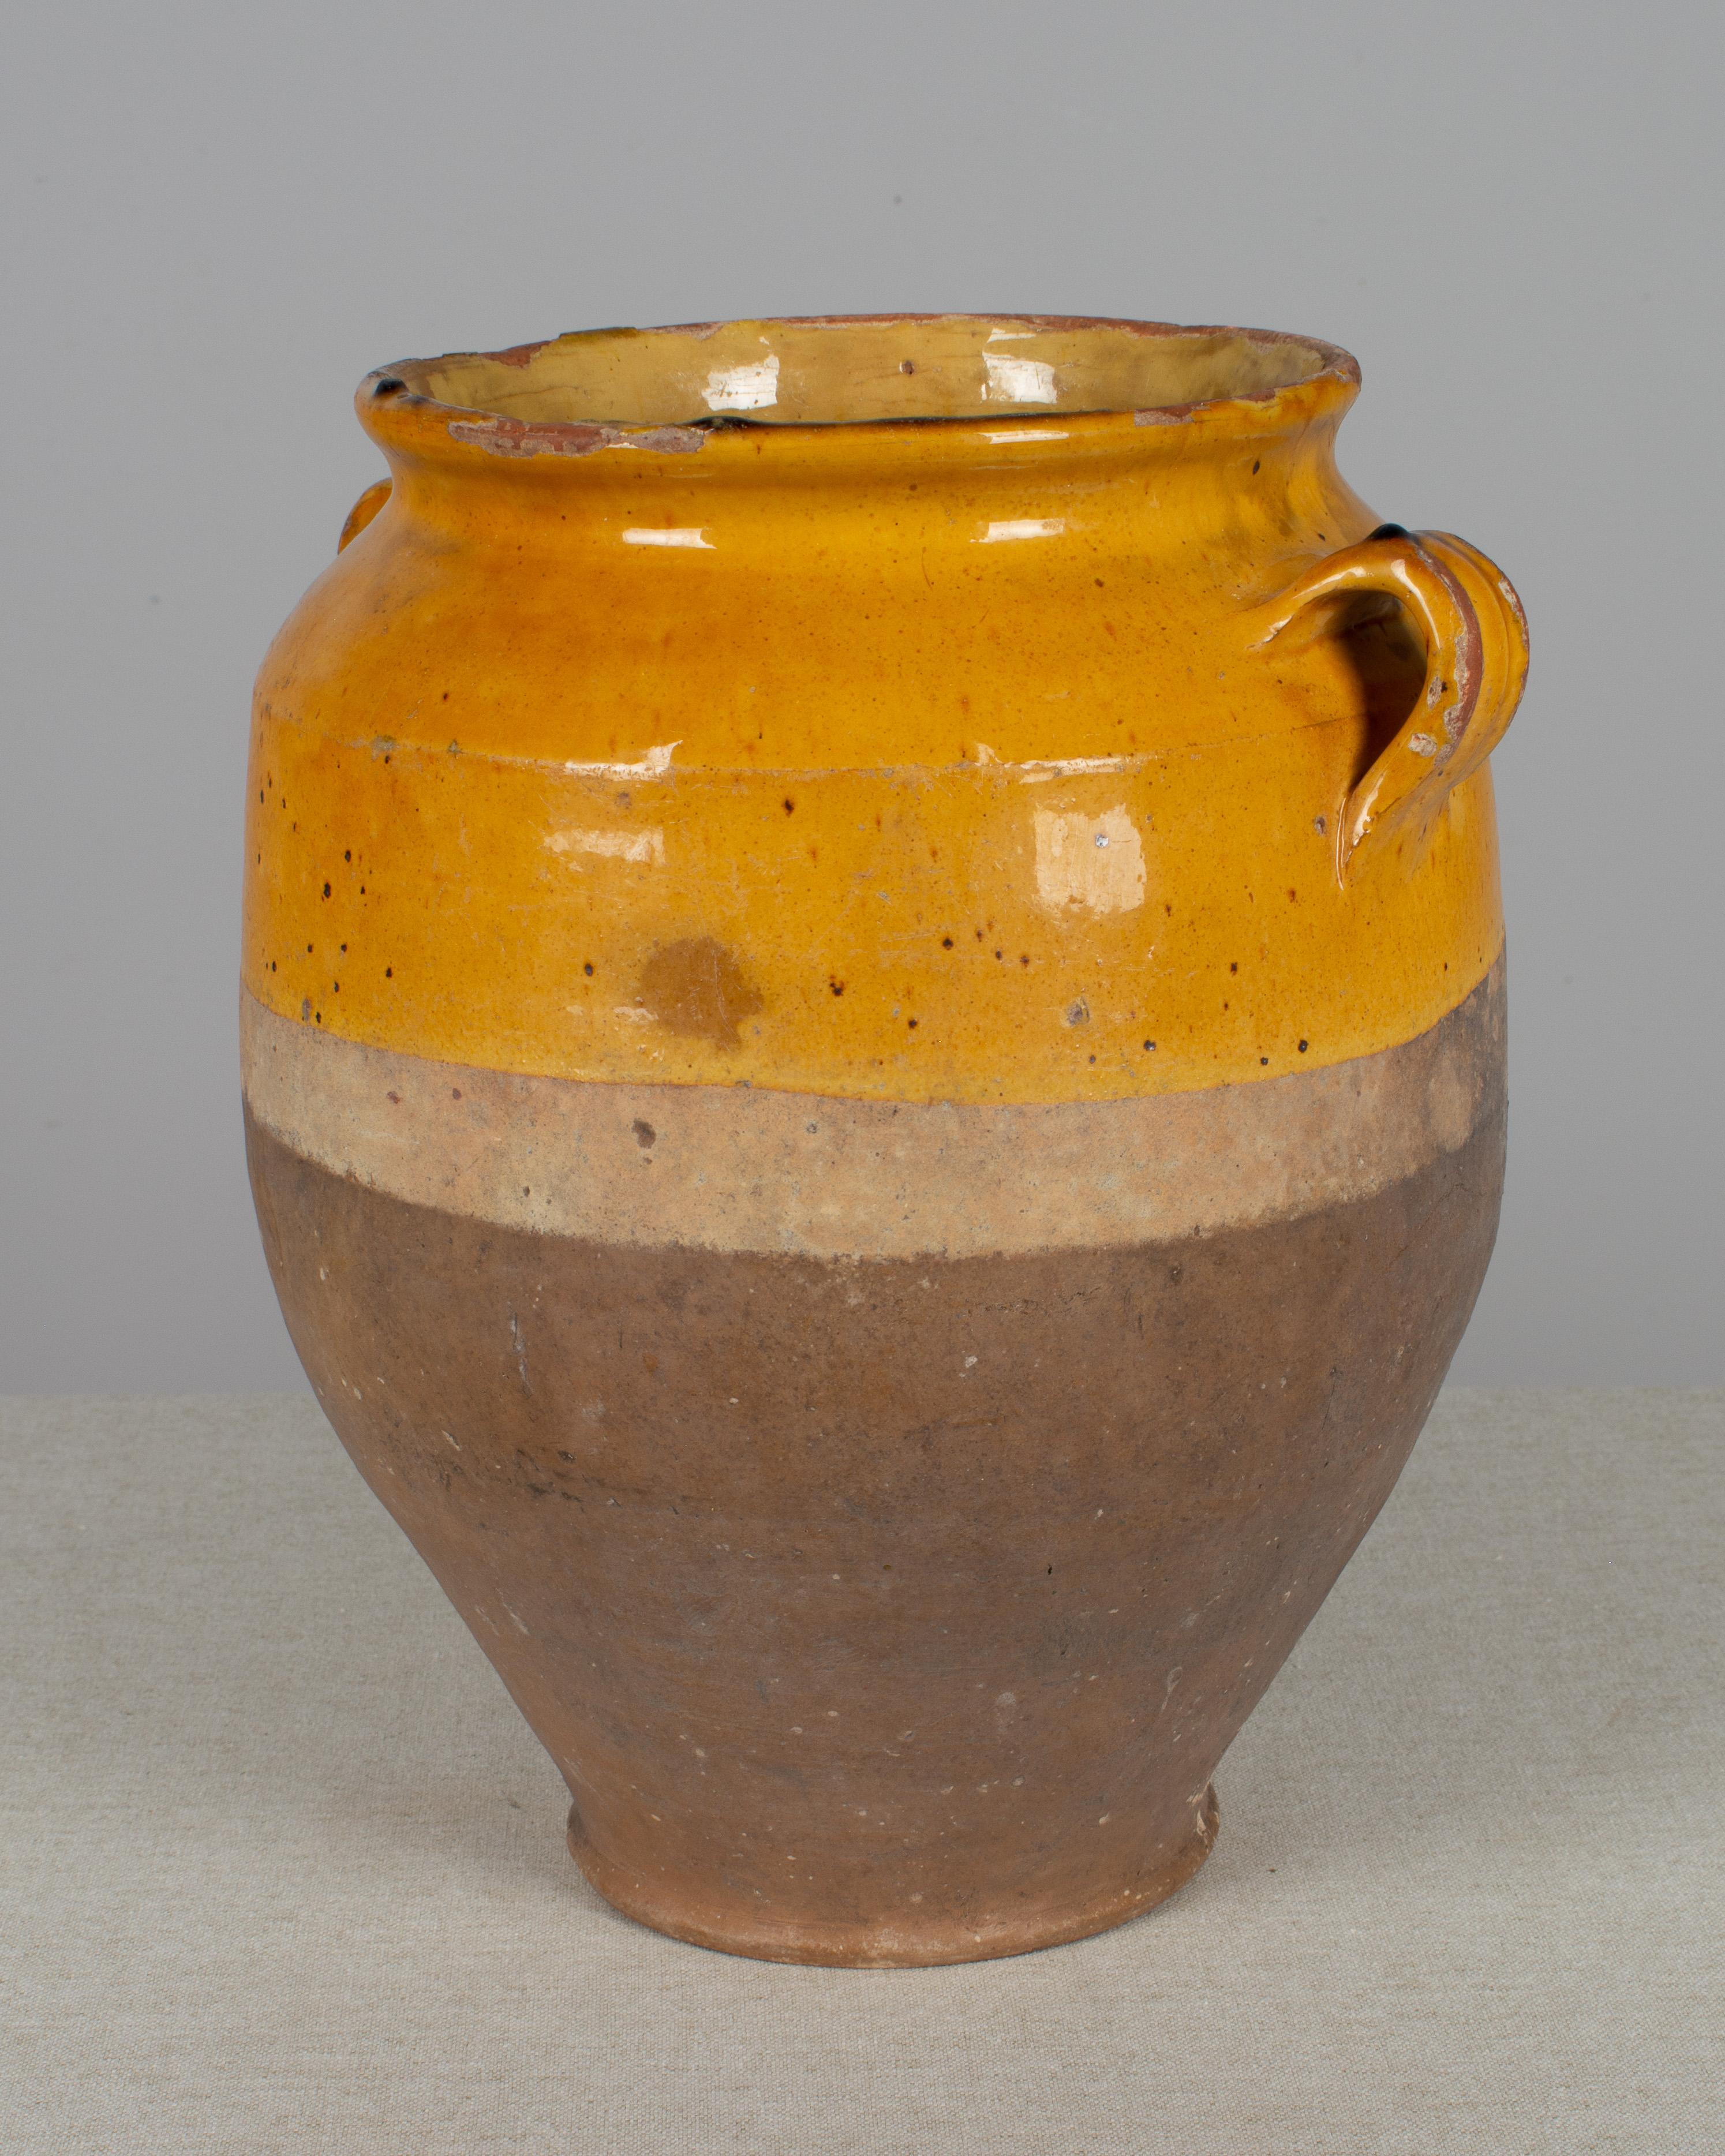 An earthenware confit pot from the Southwest of France with traditional ochre yellow glaze. Beautiful patina and bright color with a drip of green glaze. Minor losses. These ordinary earthenware vessels were once used daily in the French country